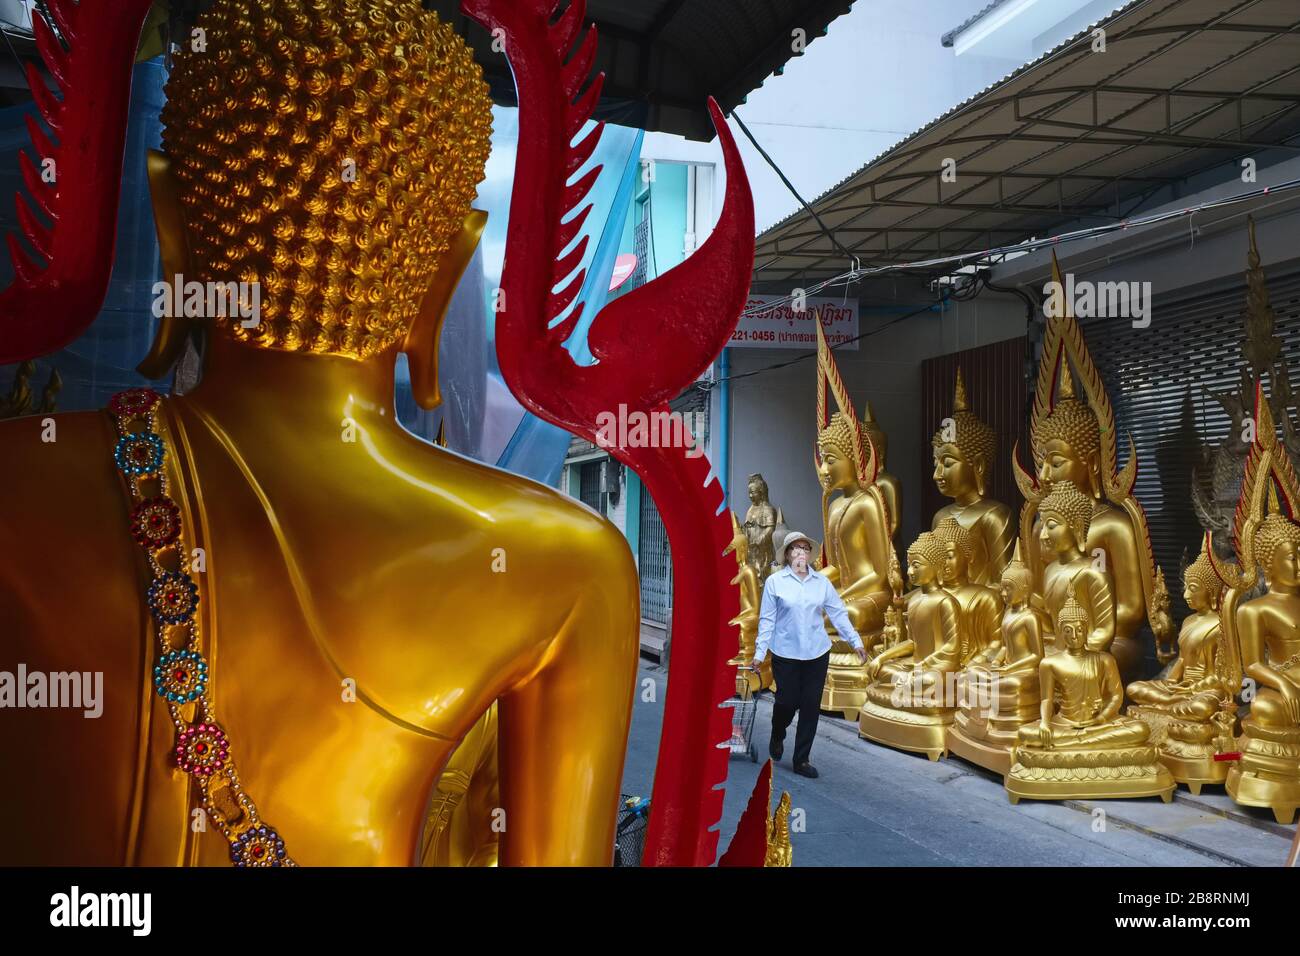 A woman passes through an alley off Bamrung Muang Rd., Bangkok, Thailand, past a row of Buddha statues manufactured in adjacent small factories Stock Photo